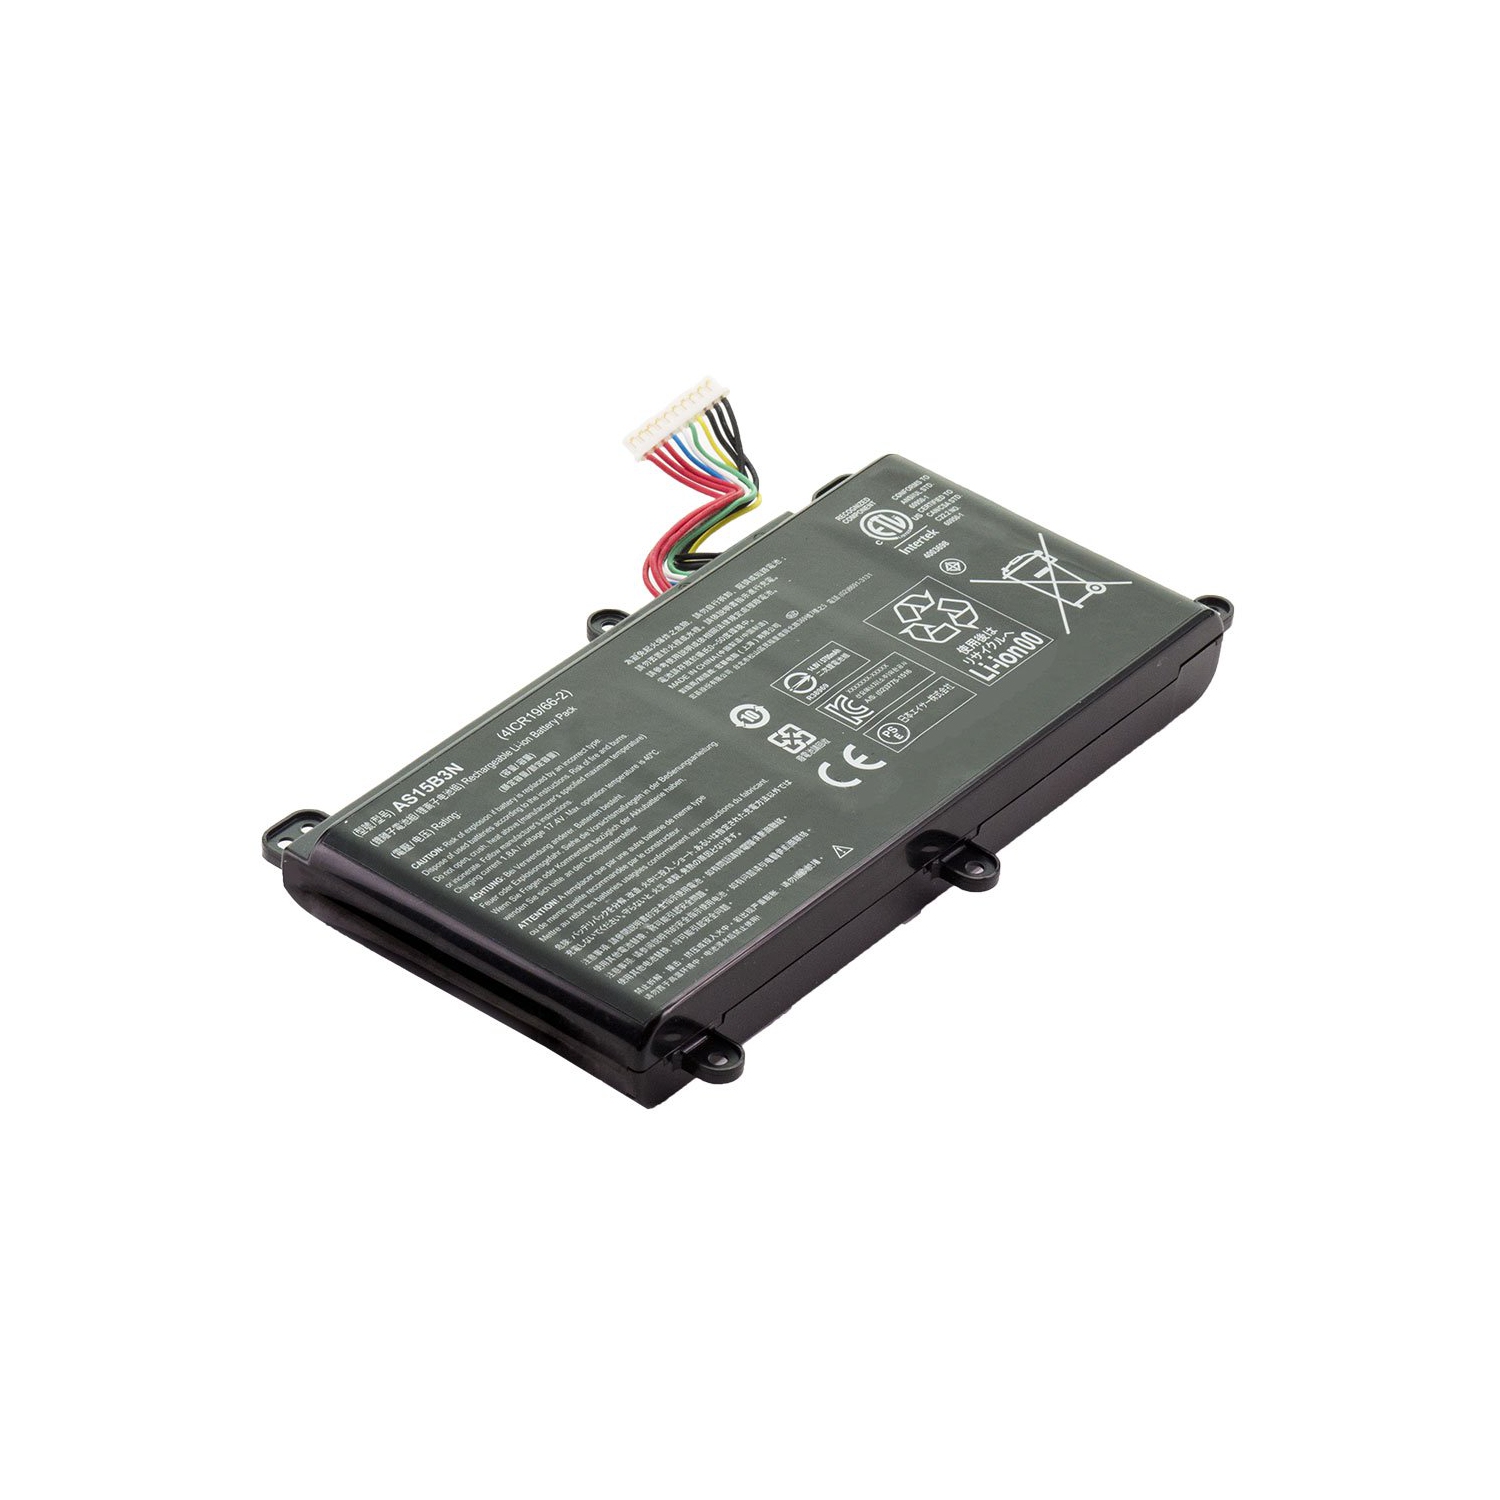 Laptop Battery Replacement for Acer Predator 17 G9-792-78CG, AS15B3N, KT.00803.004, KT.00803.005